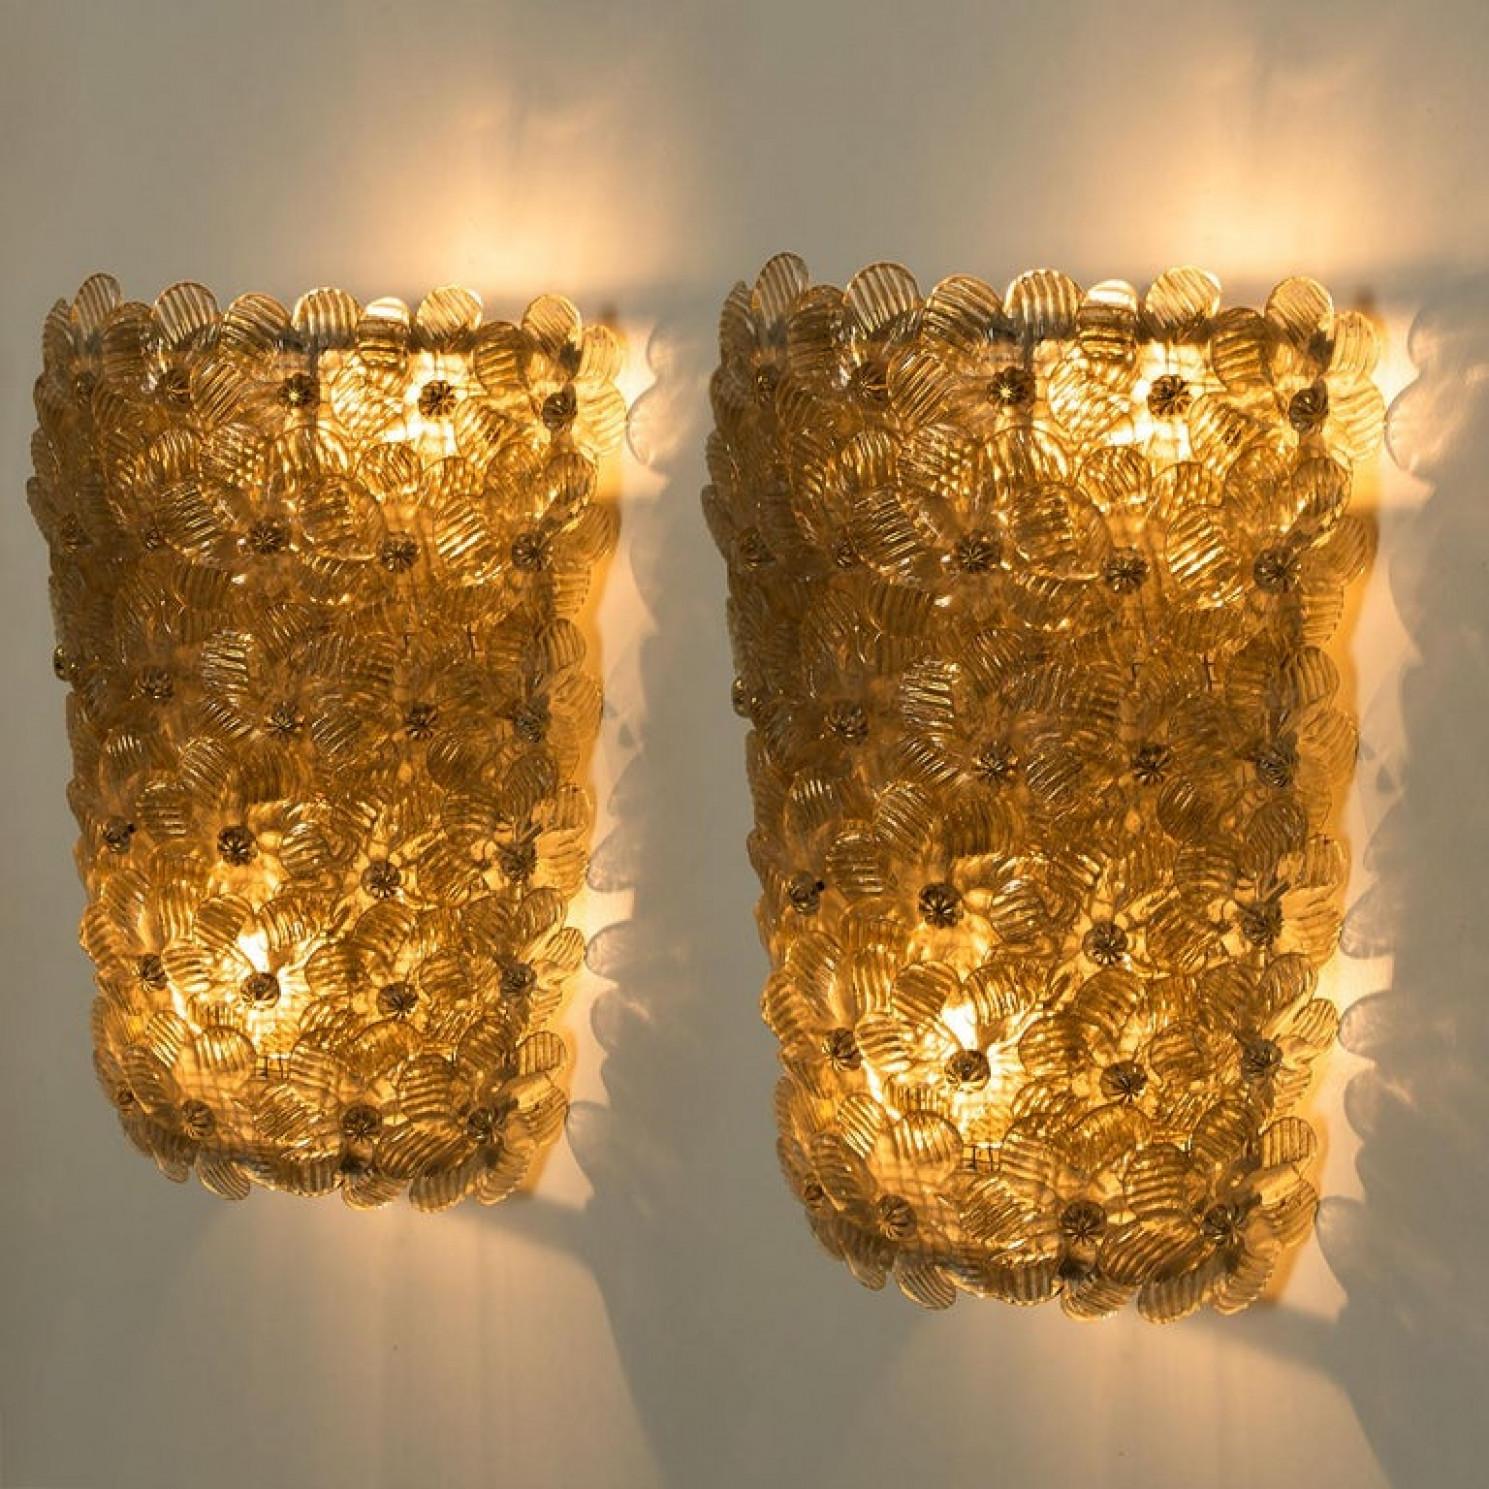 Mid-Century Modern Pair of Flower Light Fixtures by Barovier & Toso, Murano, 1990s For Sale